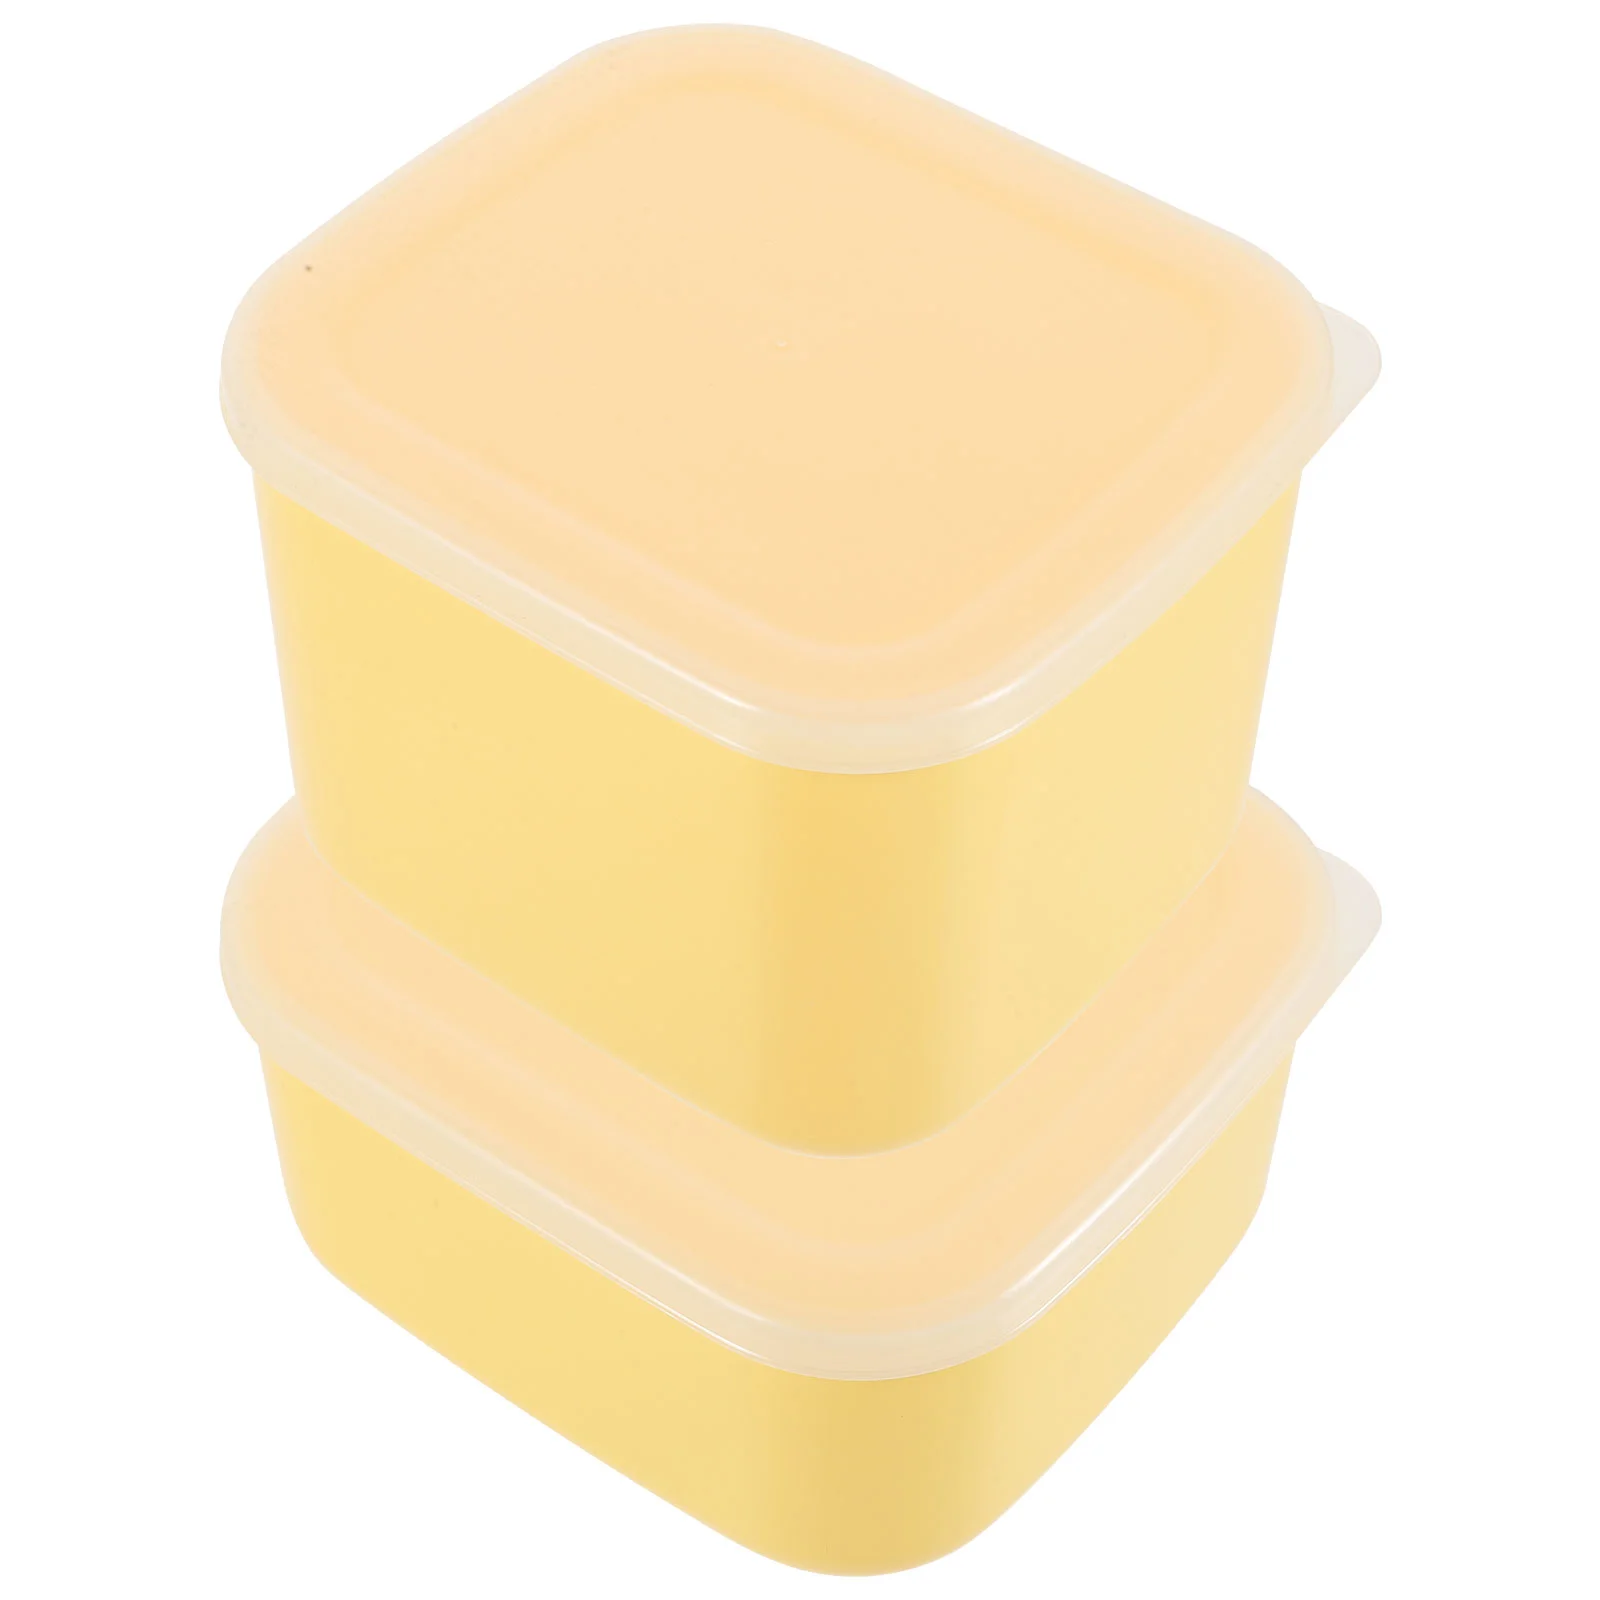 

2 Pcs Cheese Crisper Food Container Keeping Fresh Butter Cases Serving Kitchen Supplies Lid Design Containers Sealing